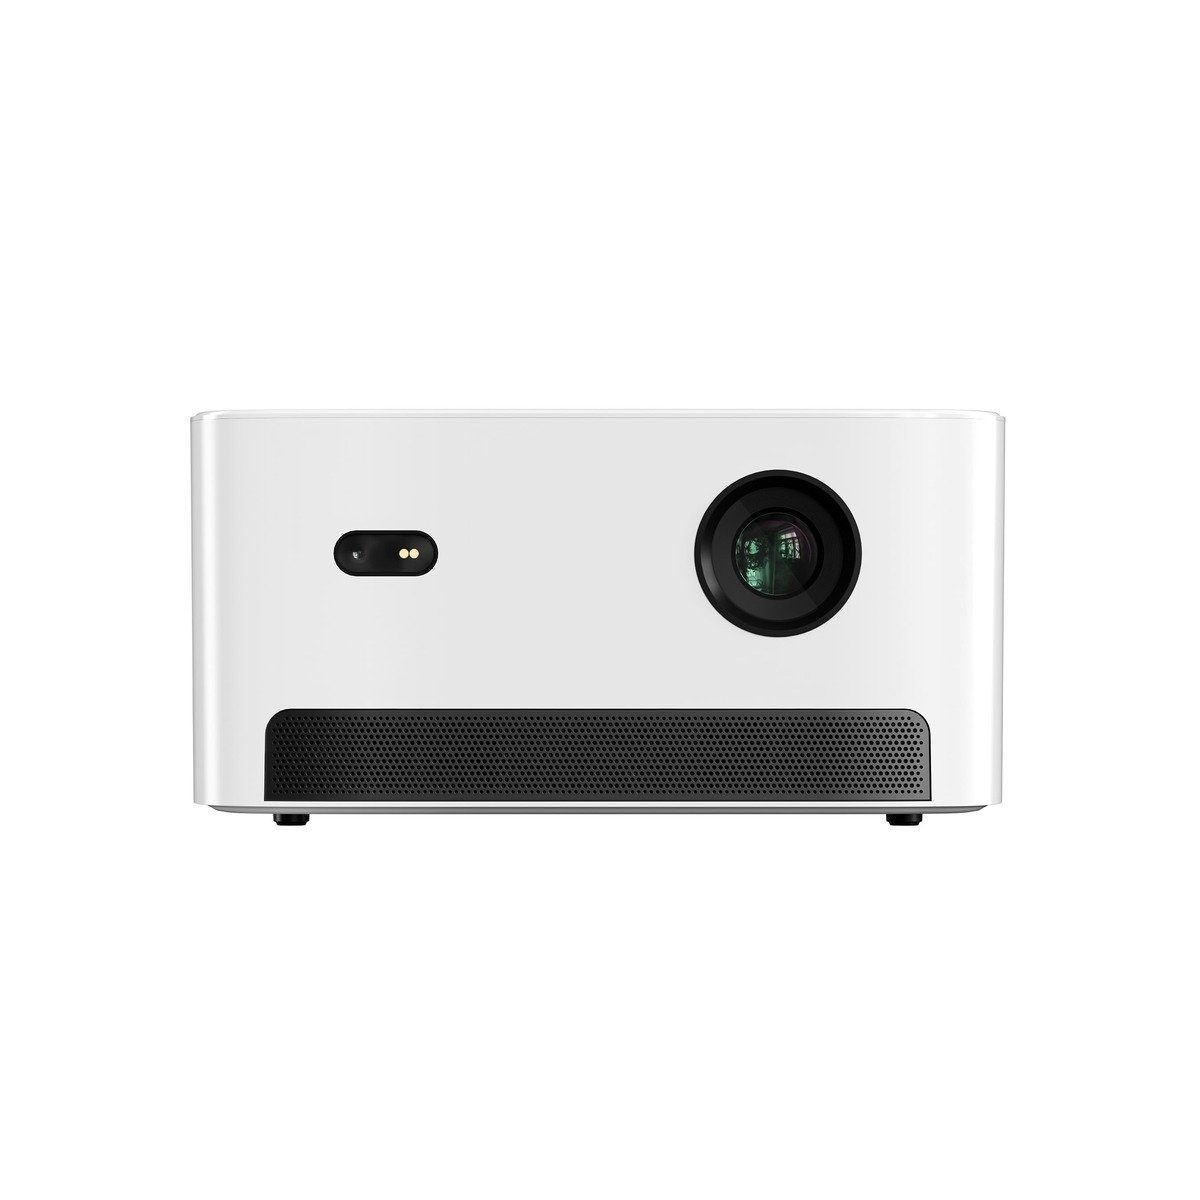 Beamer 540LM Neo Projector, Dangbei White